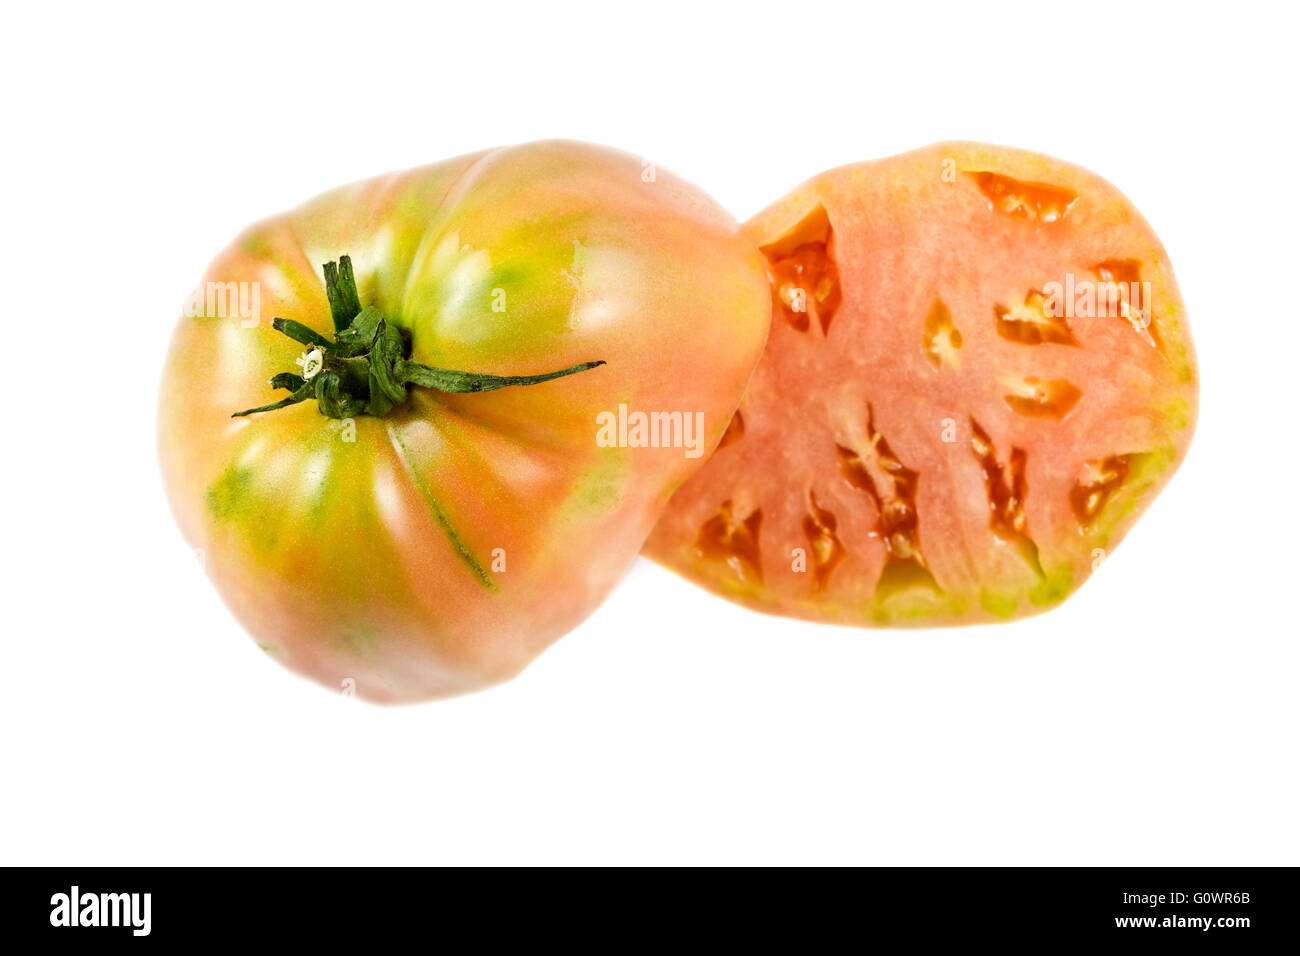 Near ripe ox heart tomato, Solanum lycopersicum, showing many small seed compartments, called locules, and a nice pink flesh. Stock Photo